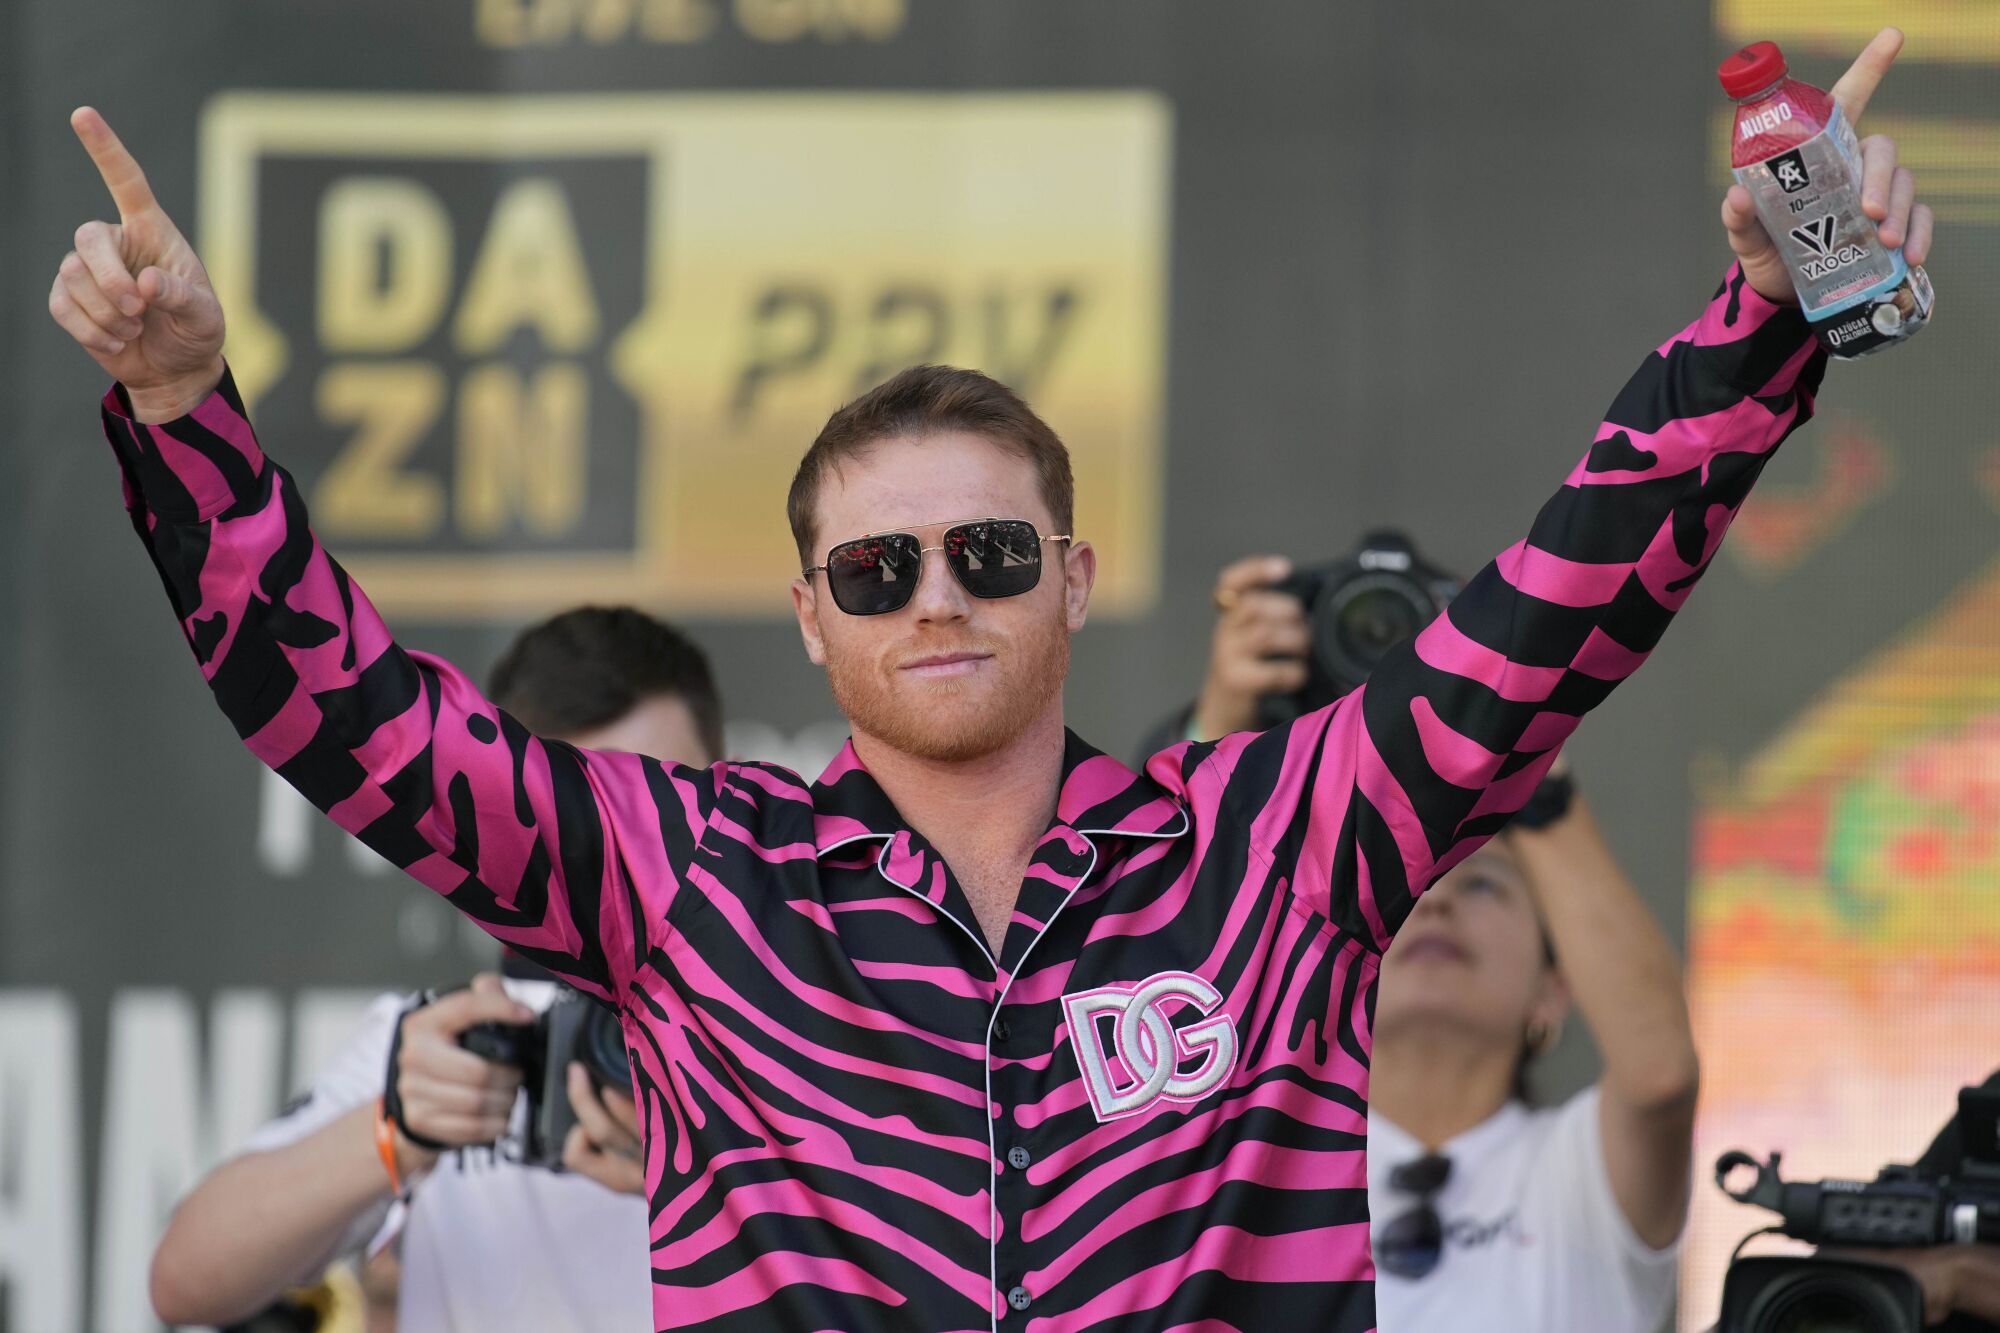 Canelo Álvarez motions to the crowd during a ceremonial boxing weigh-in Friday in Las Vegas